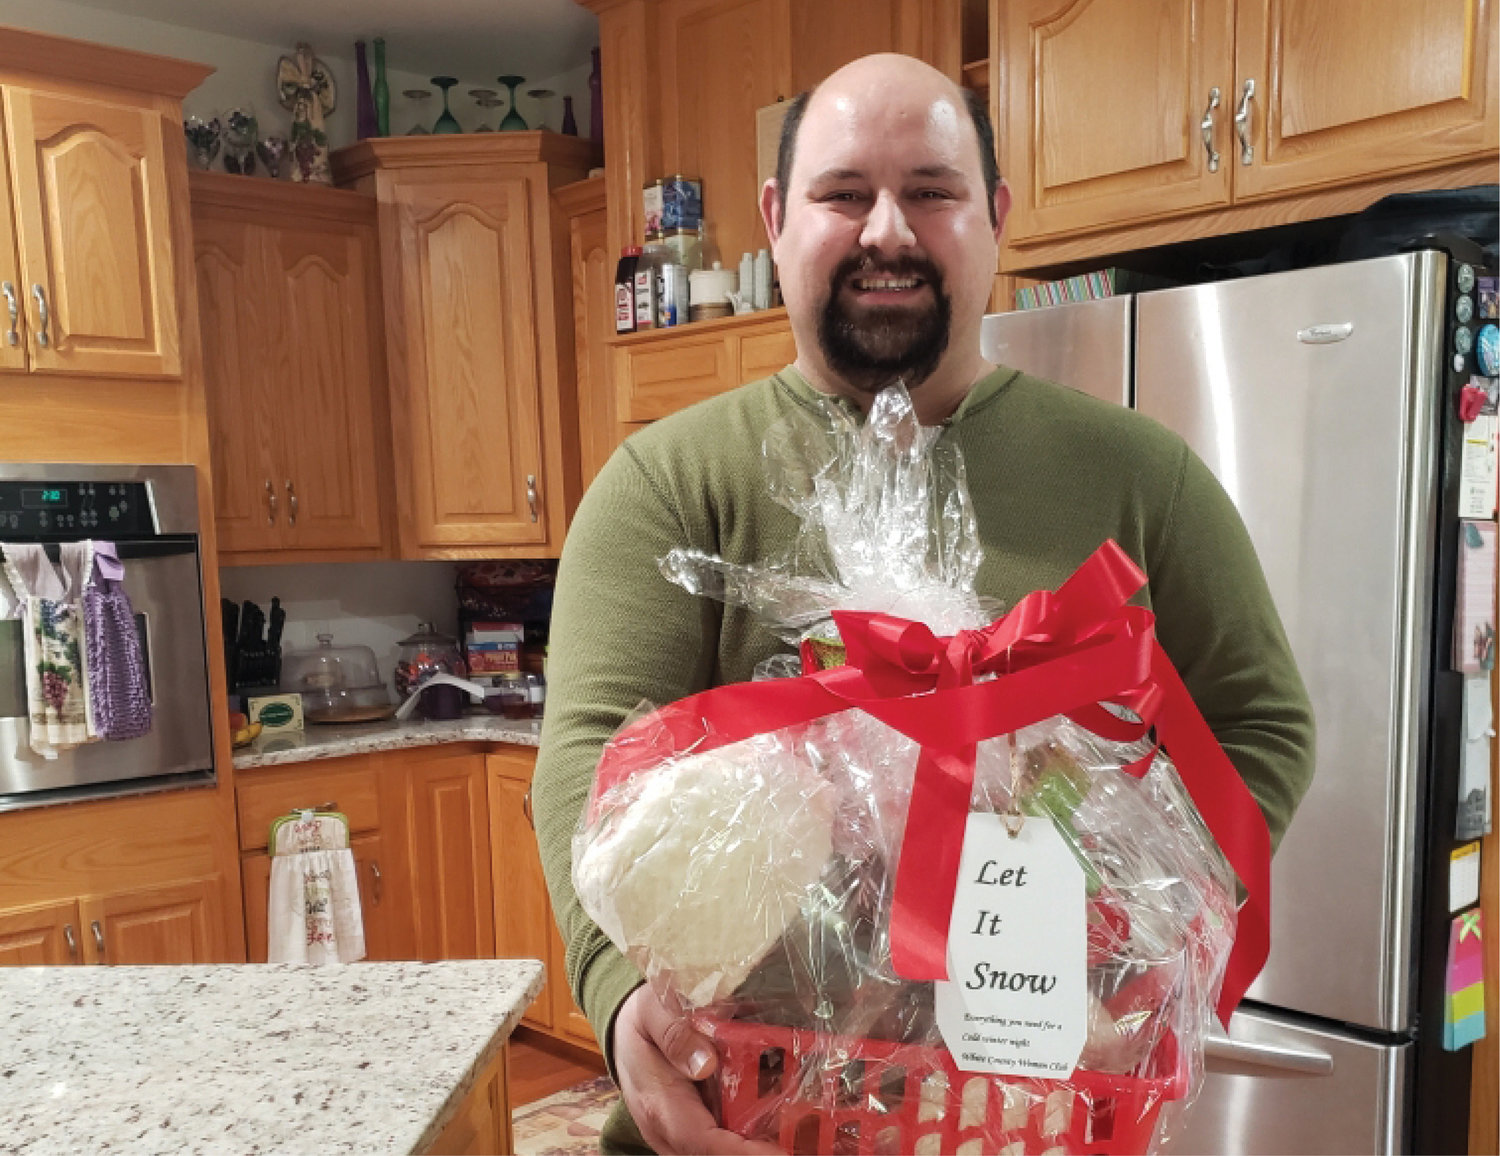 Sparta Woman’s Club recently held a craft and vendor show, at White County Agriculture Complex. Funds raised are divided among the club’s various projects and charities. One of the door prize winners was Brandon Griffin, who received a gift basket. The next craft and vendor show will be May 14, 2022.